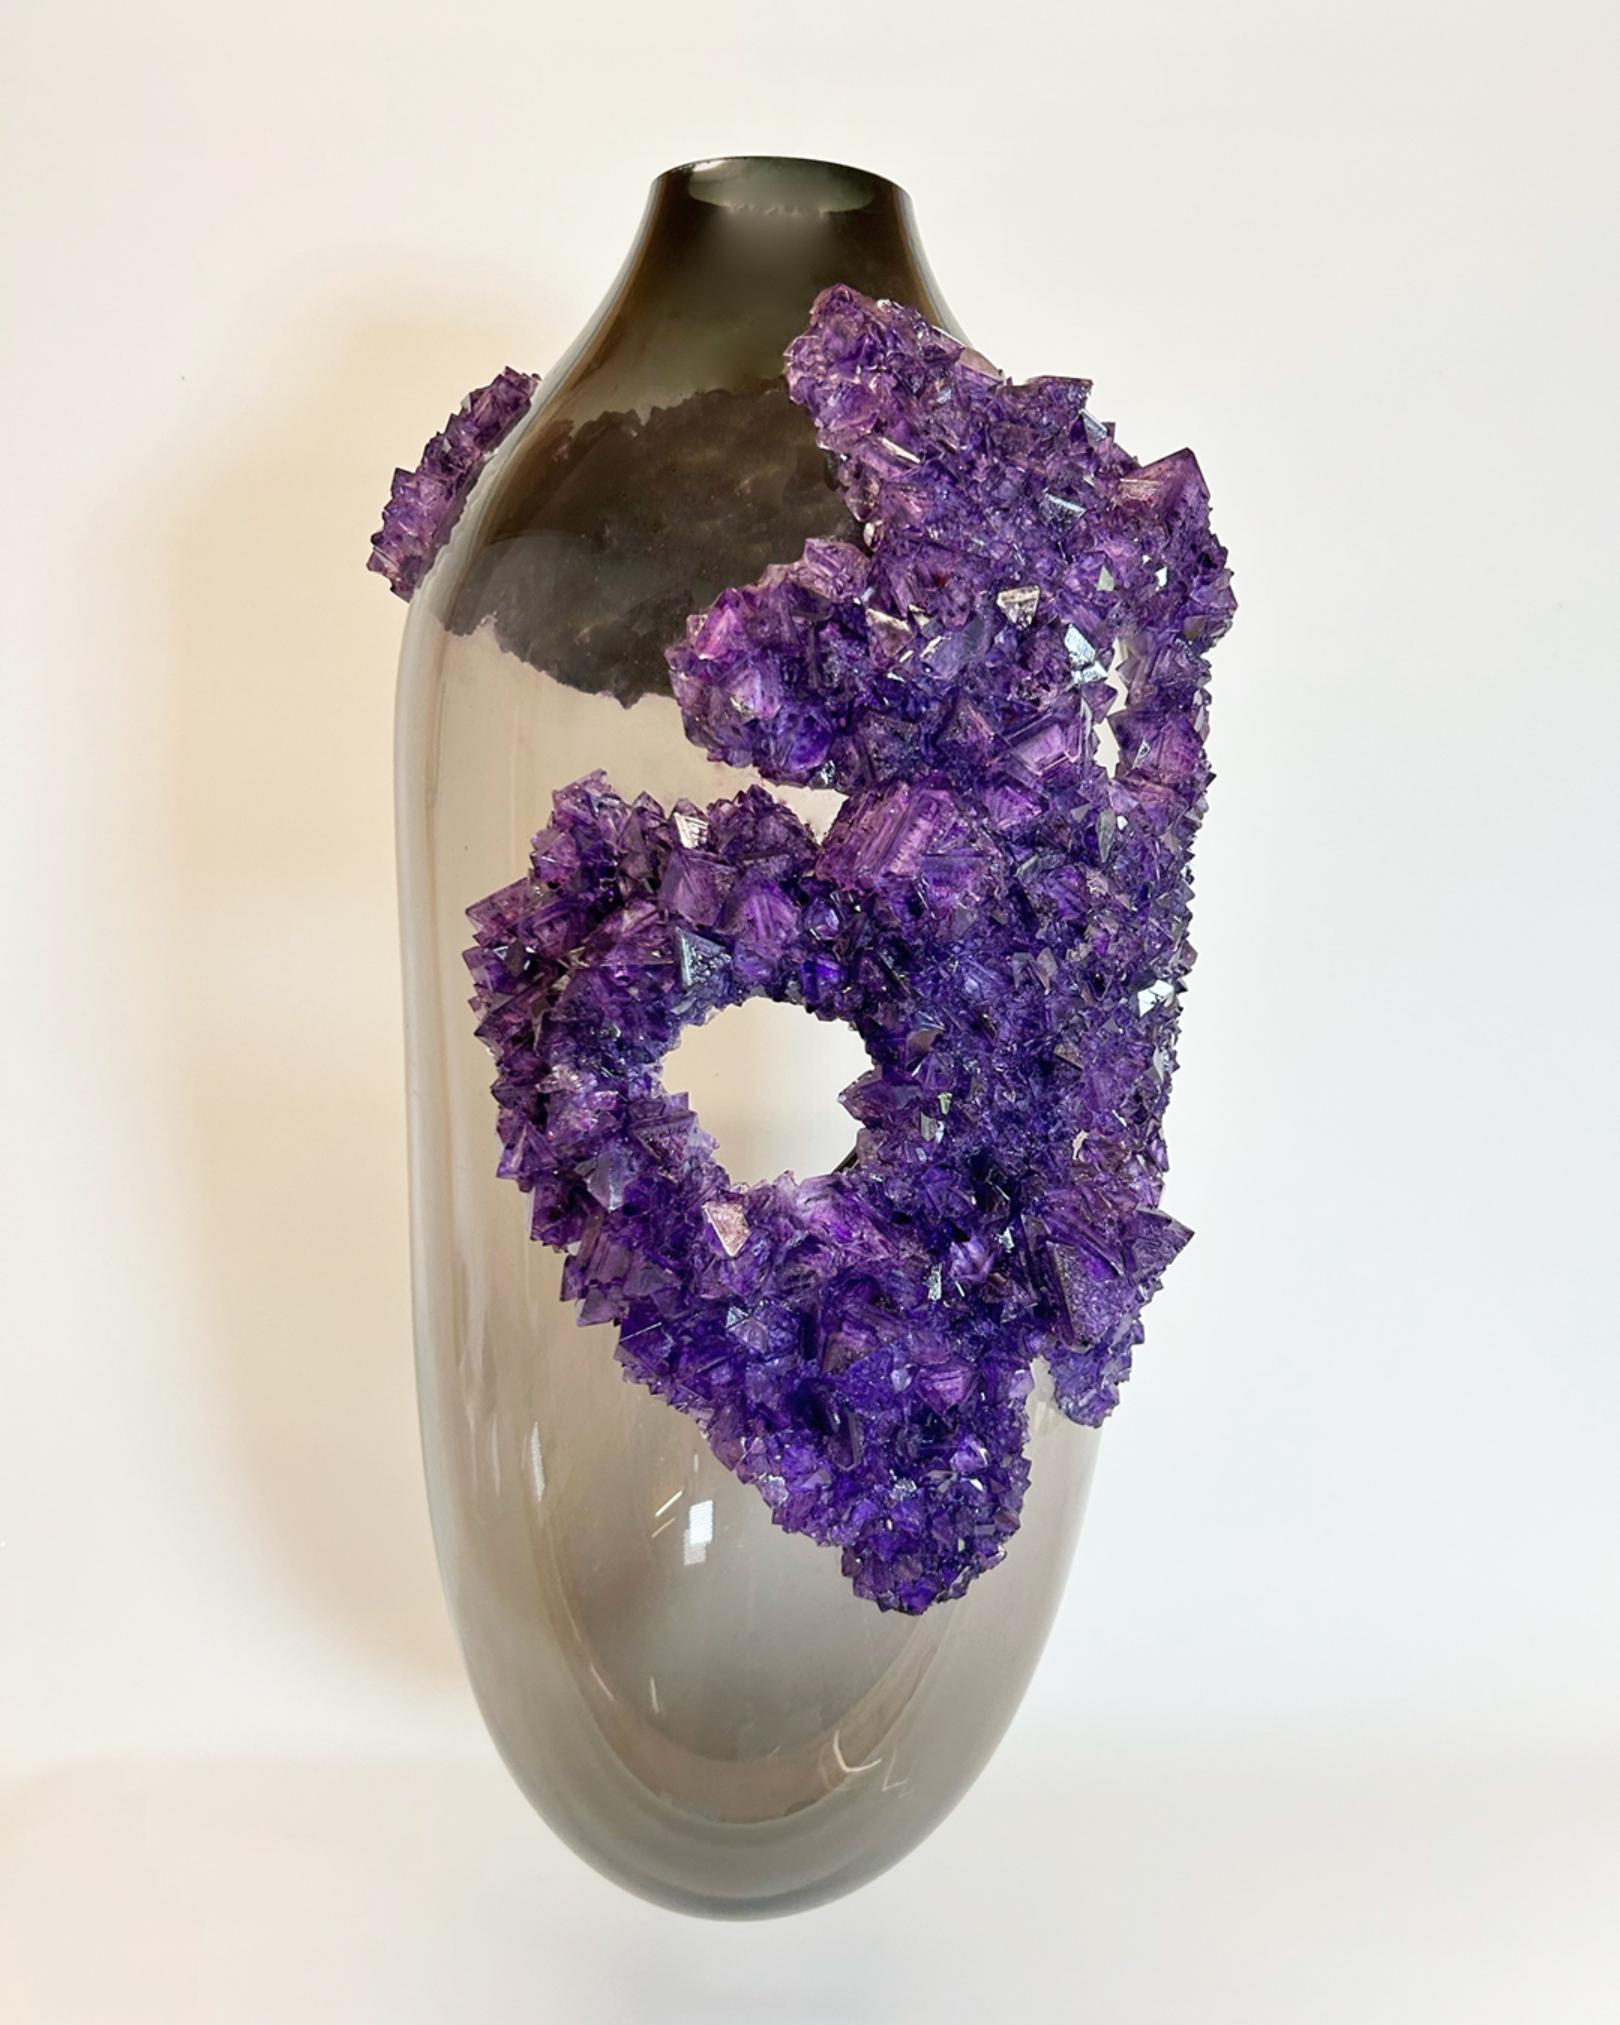 Emperors Breath Vessel 1 by Mark Sturkenboom
Dimensions: W 60 x D 30 x H 25 cm
Materials: Mouth Blown Glass, Overgrown Crystals


Mark Sturkenboom (Driebergen, 1983) is an artist that graduated with honors in 2012 at Artez Academy for the Arts in